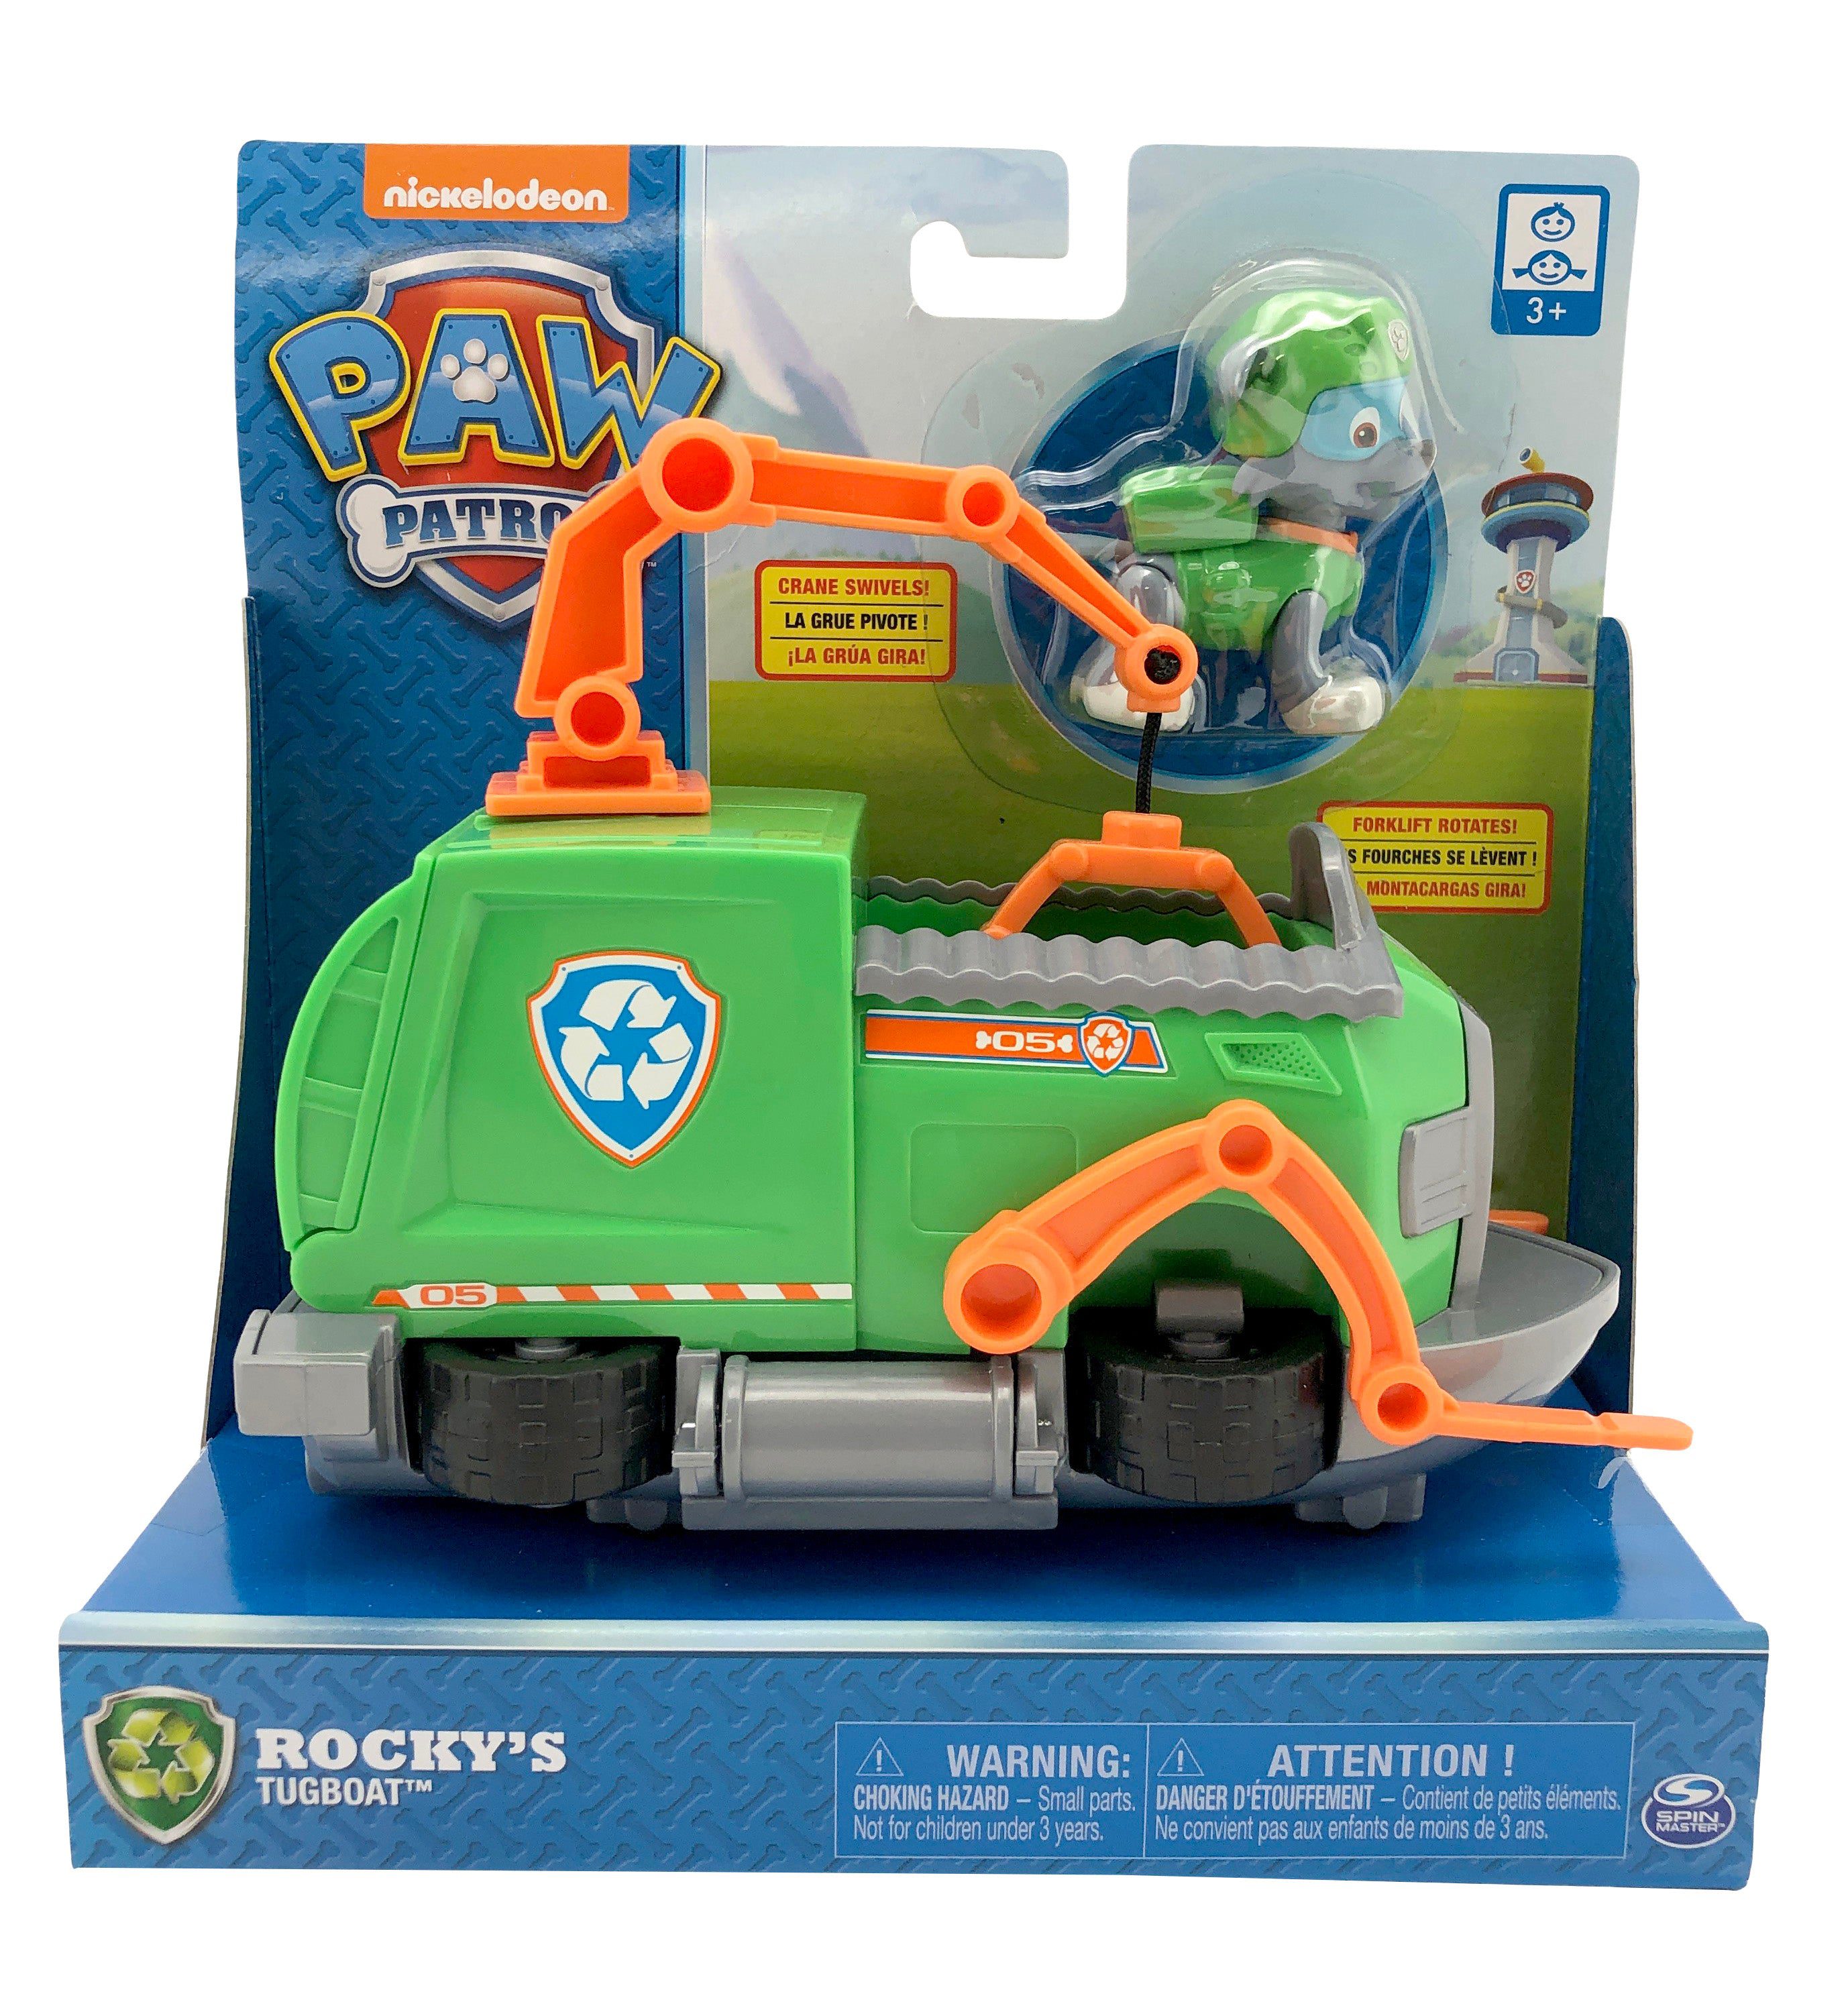 Nickelodeon Paw Patrol Characters With Vehicles / Assorted Figures / Ages 3+